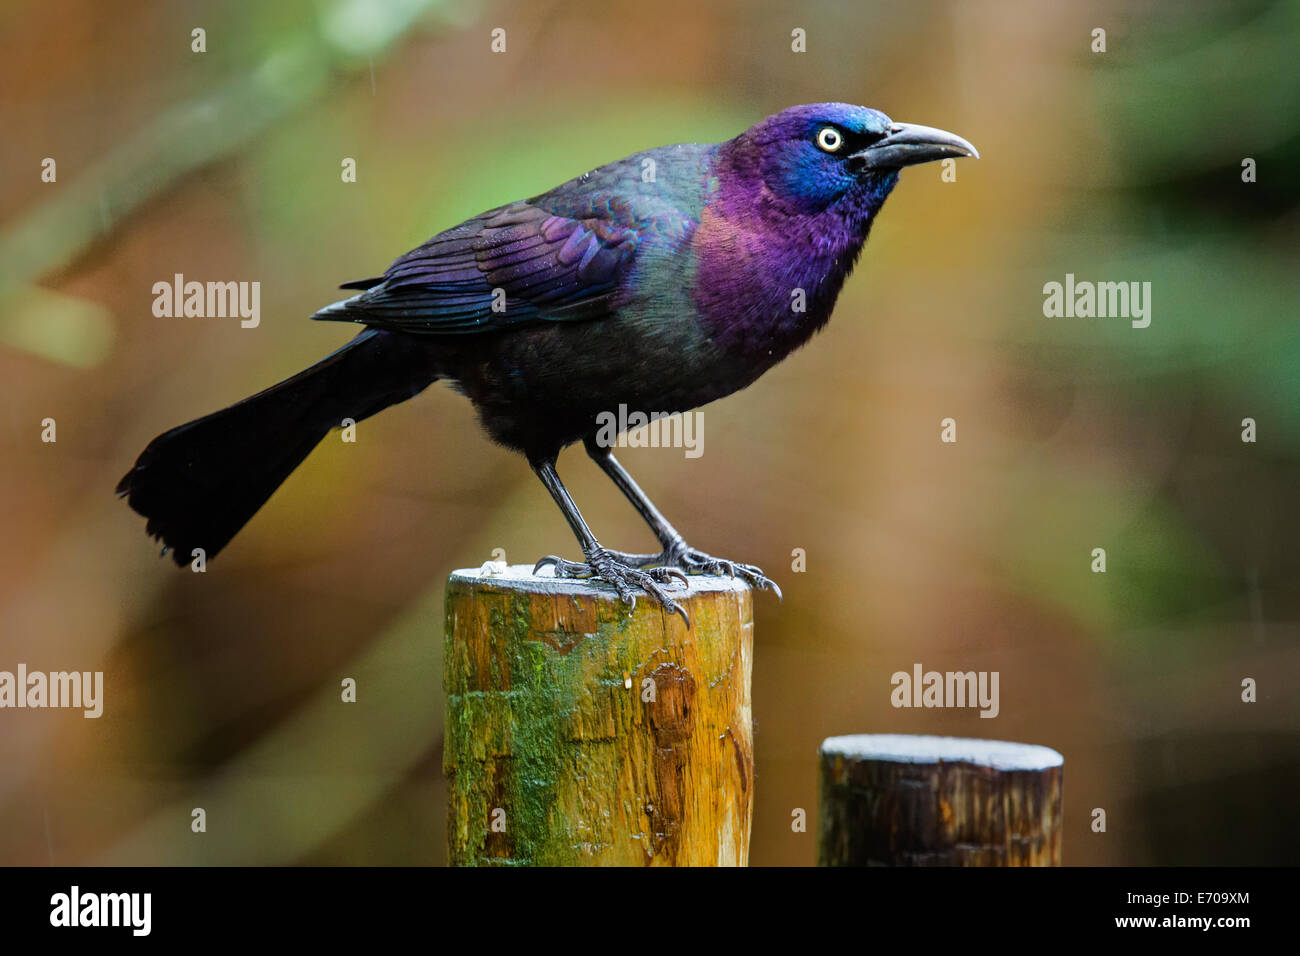 Common Grackle (Quiscalus quiscula) with an irridescent shimmer. Stock Photo